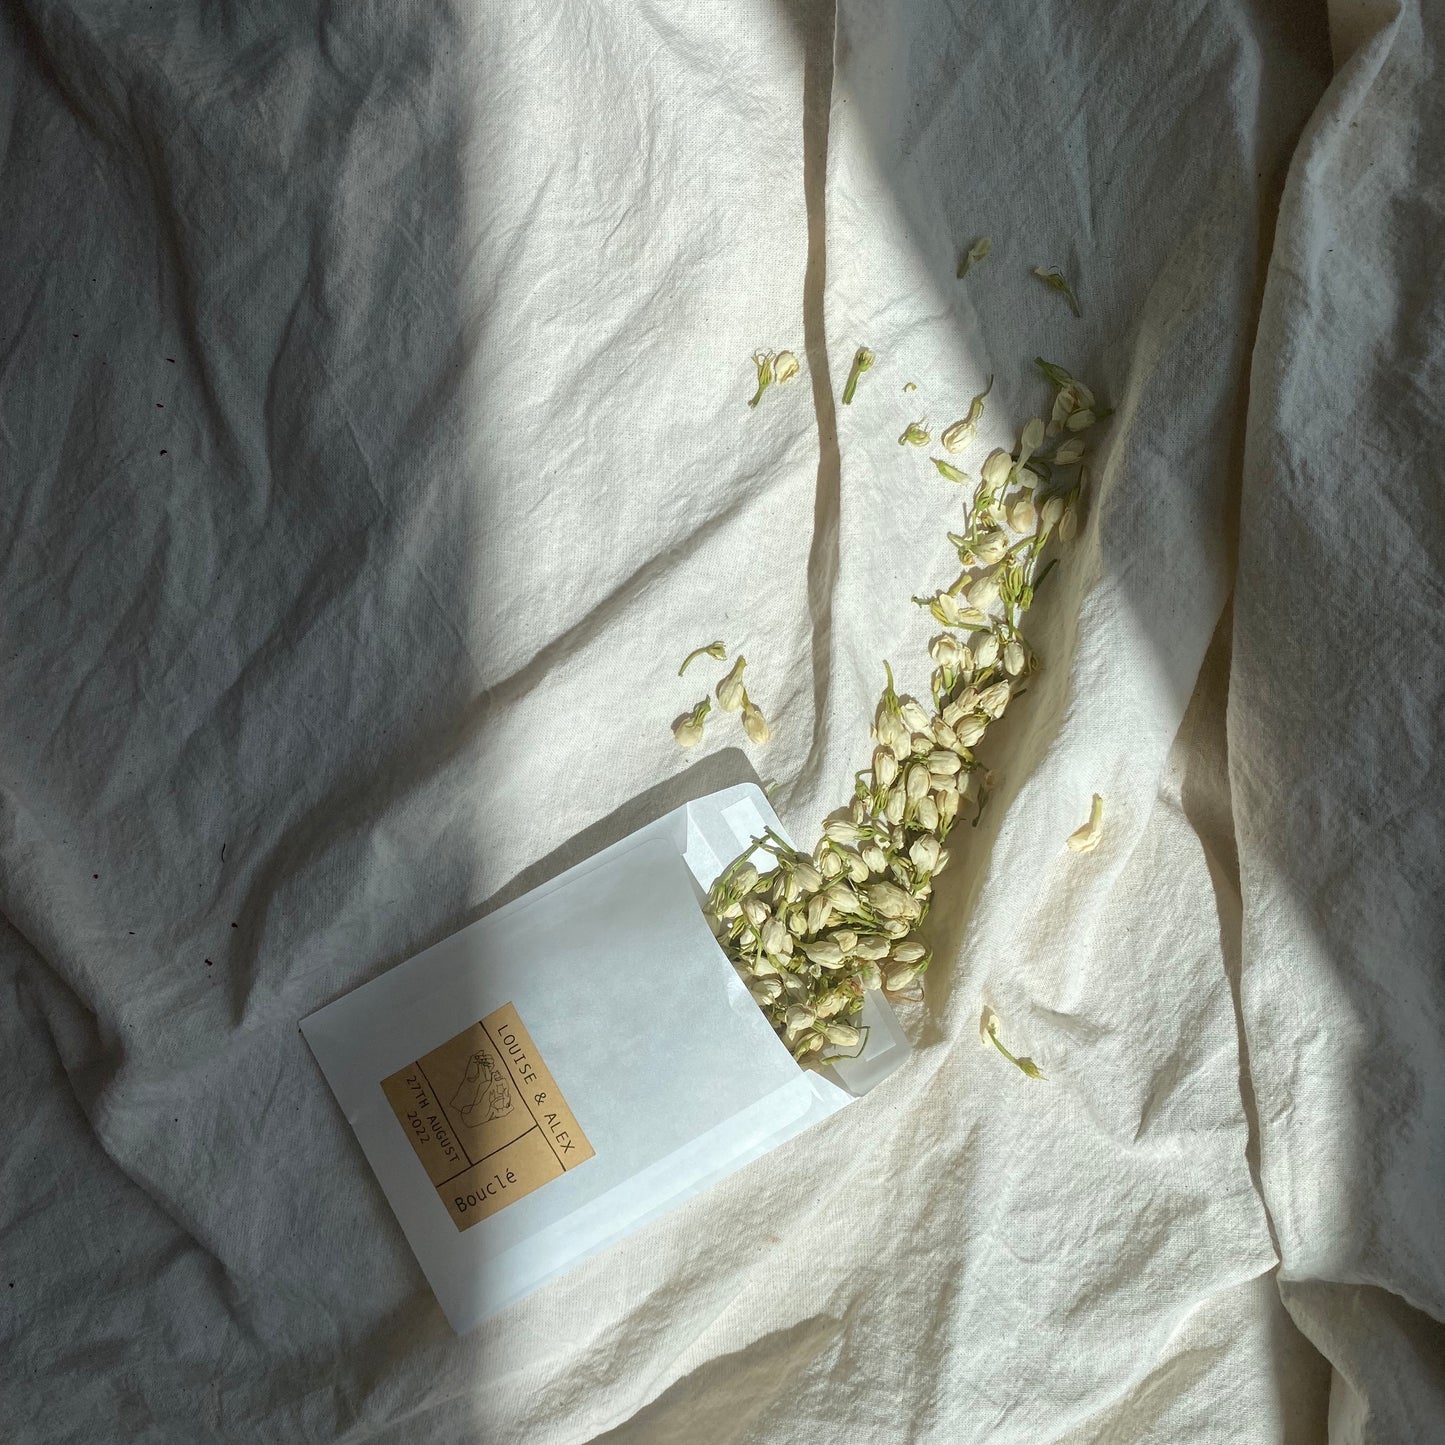 Dried botanical real petal confetti bespoke wedding pouches. This glassing plastic free pouch contains dried white jasmine buds for wedding styling.